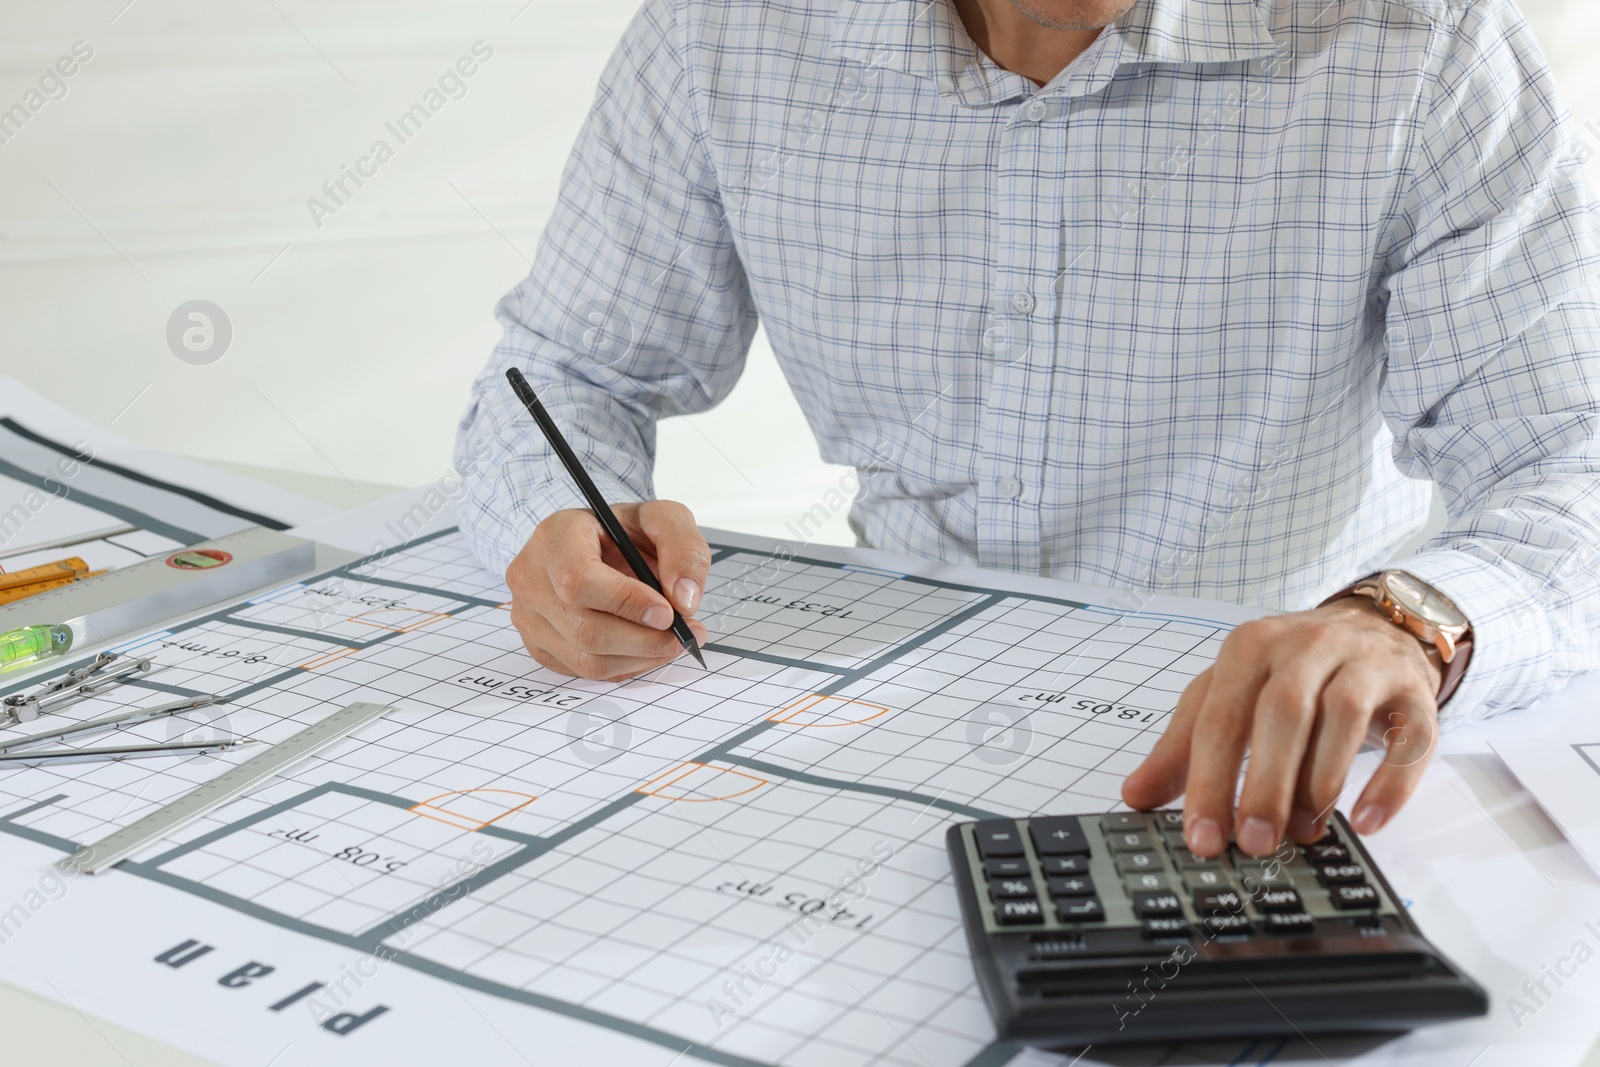 Photo of Architect working with construction drawings and calculator indoors, closeup